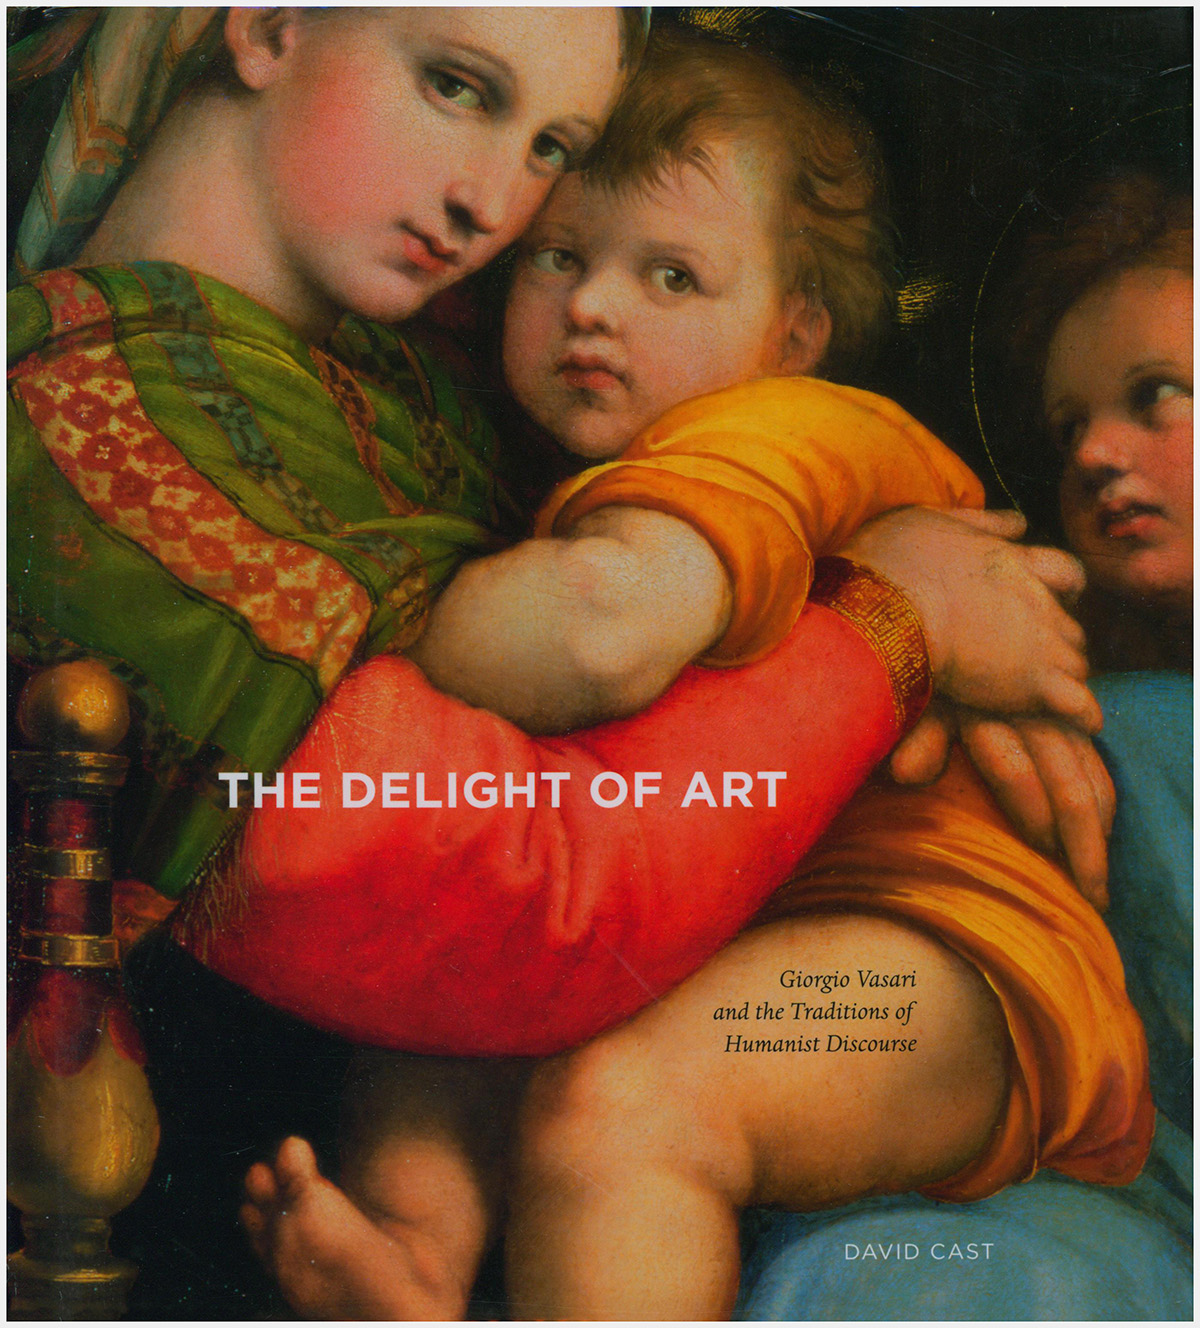 Cast, David - The Delight of Art: Giorgio Vasari and the Traditions of Humanist Discourse